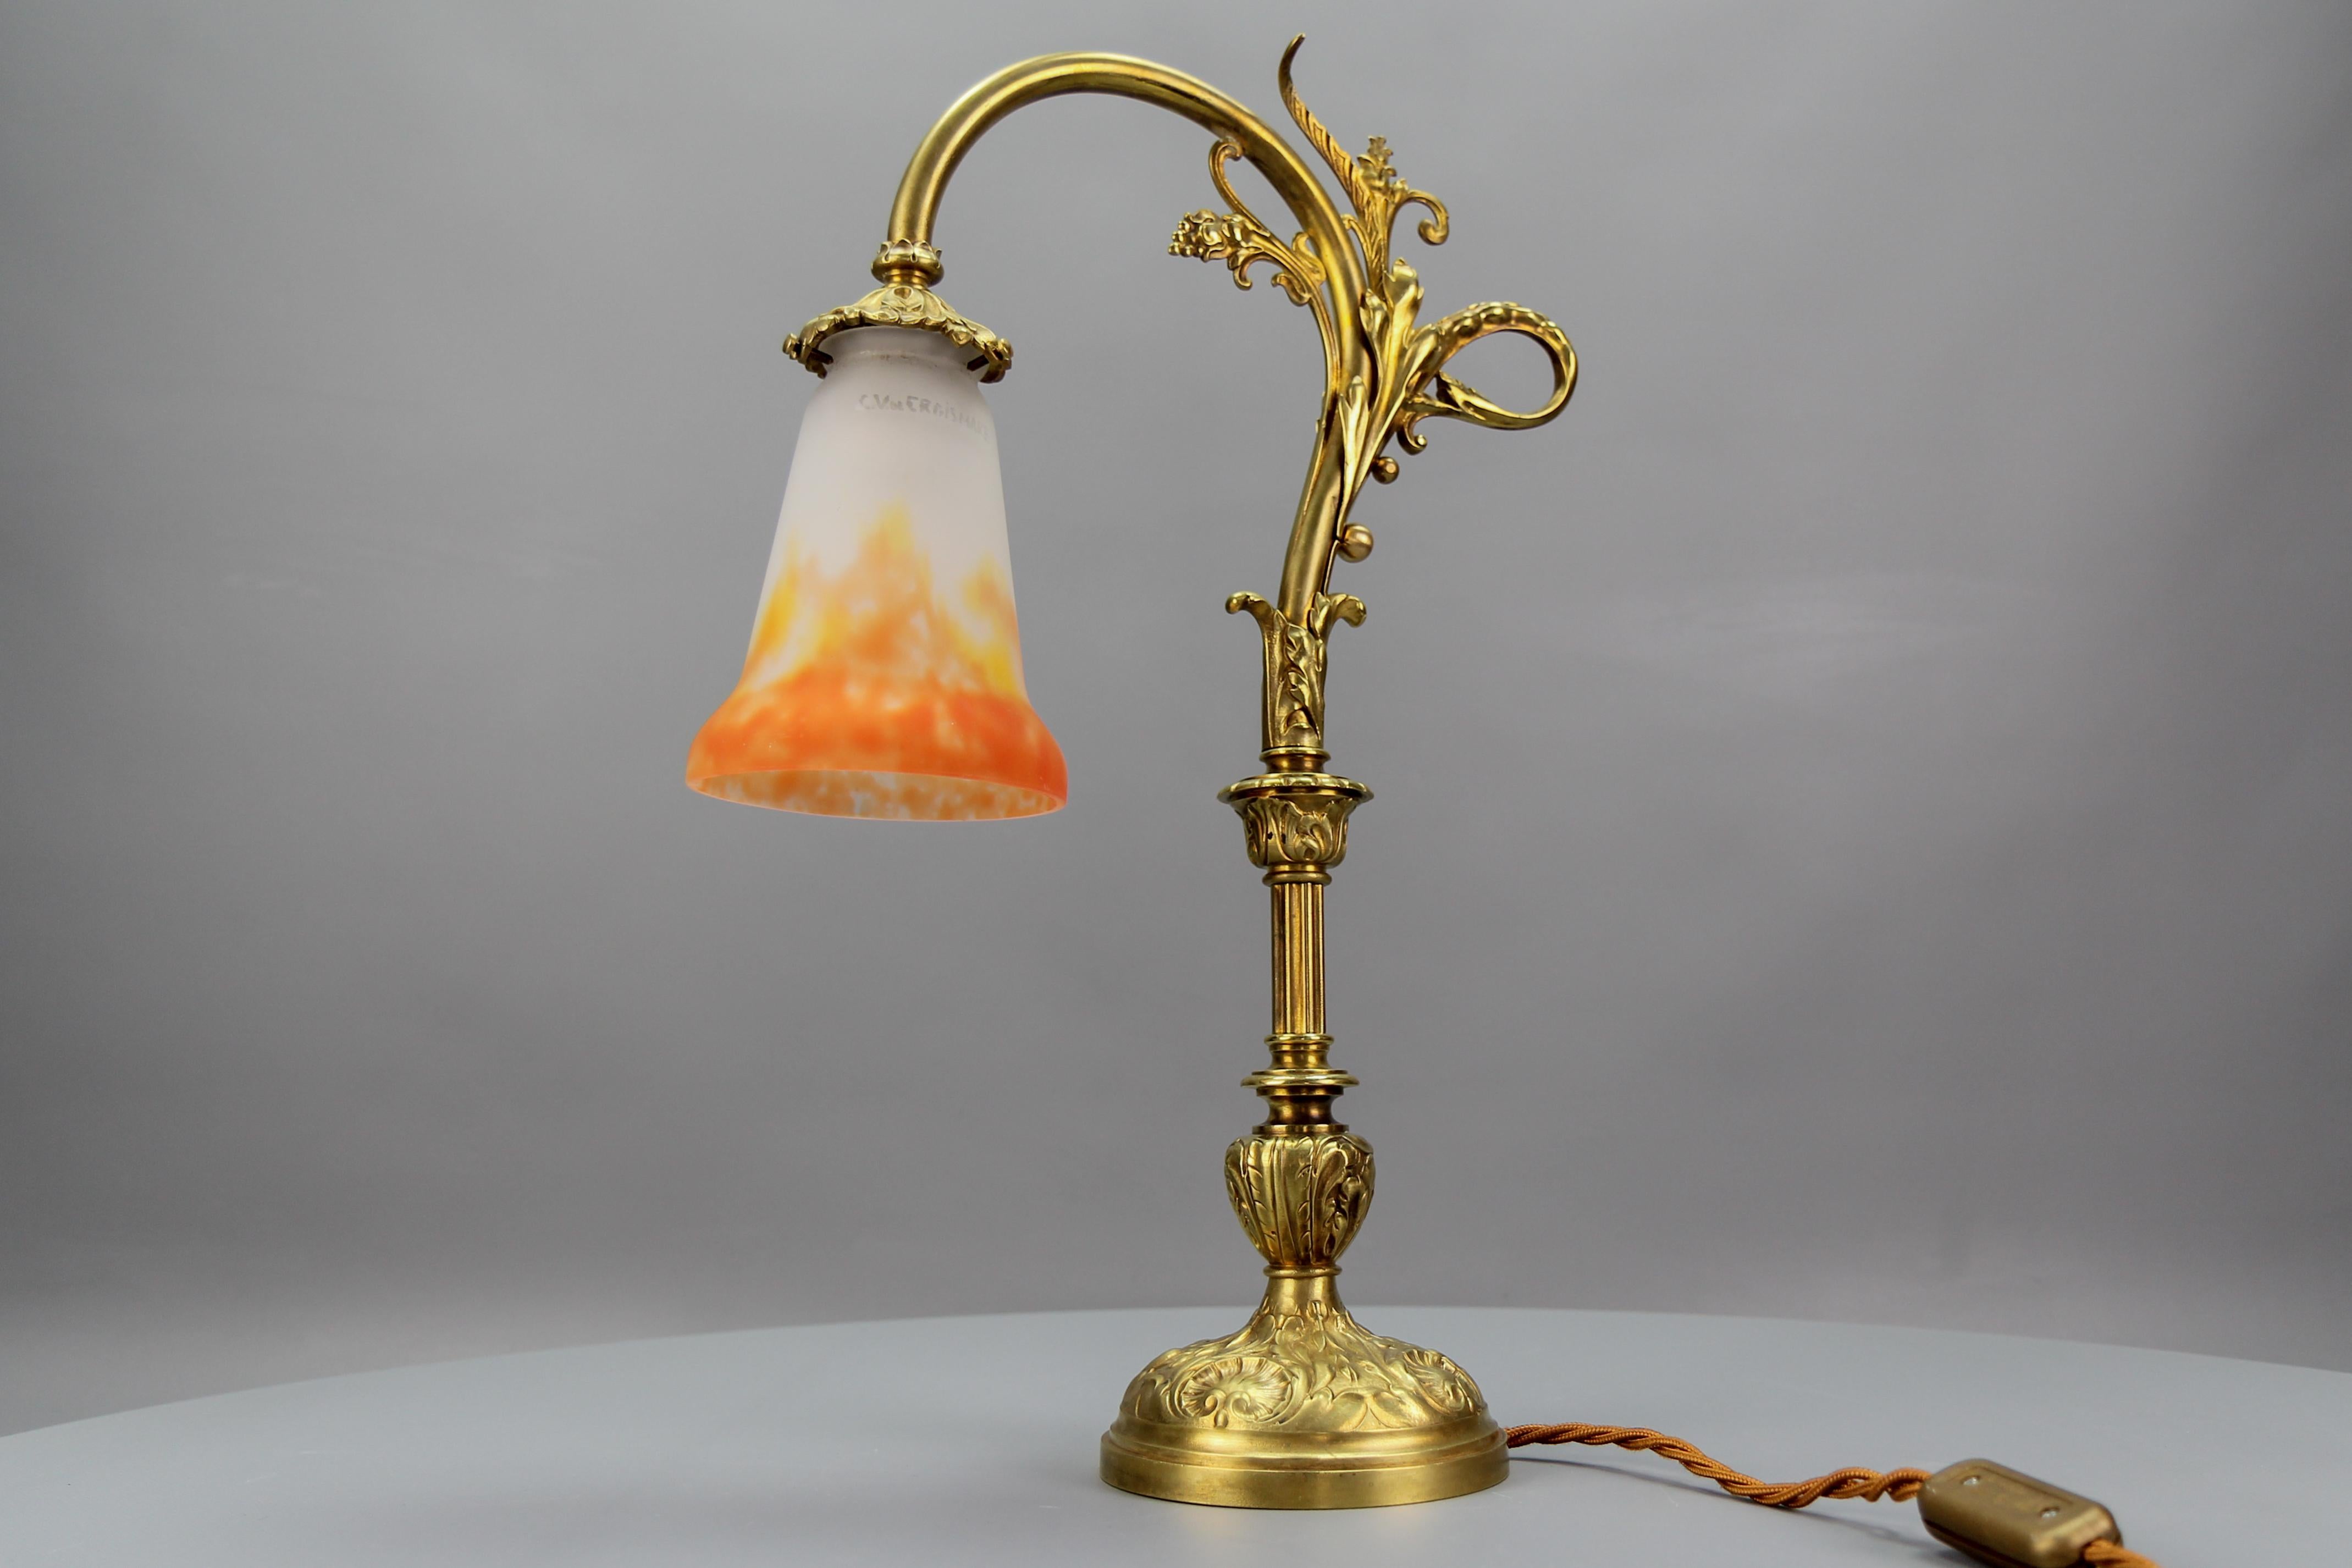 Early 20th Century French Art Nouveau Bronze Table Lamp with Glass Shade Signed GV De Croismare For Sale